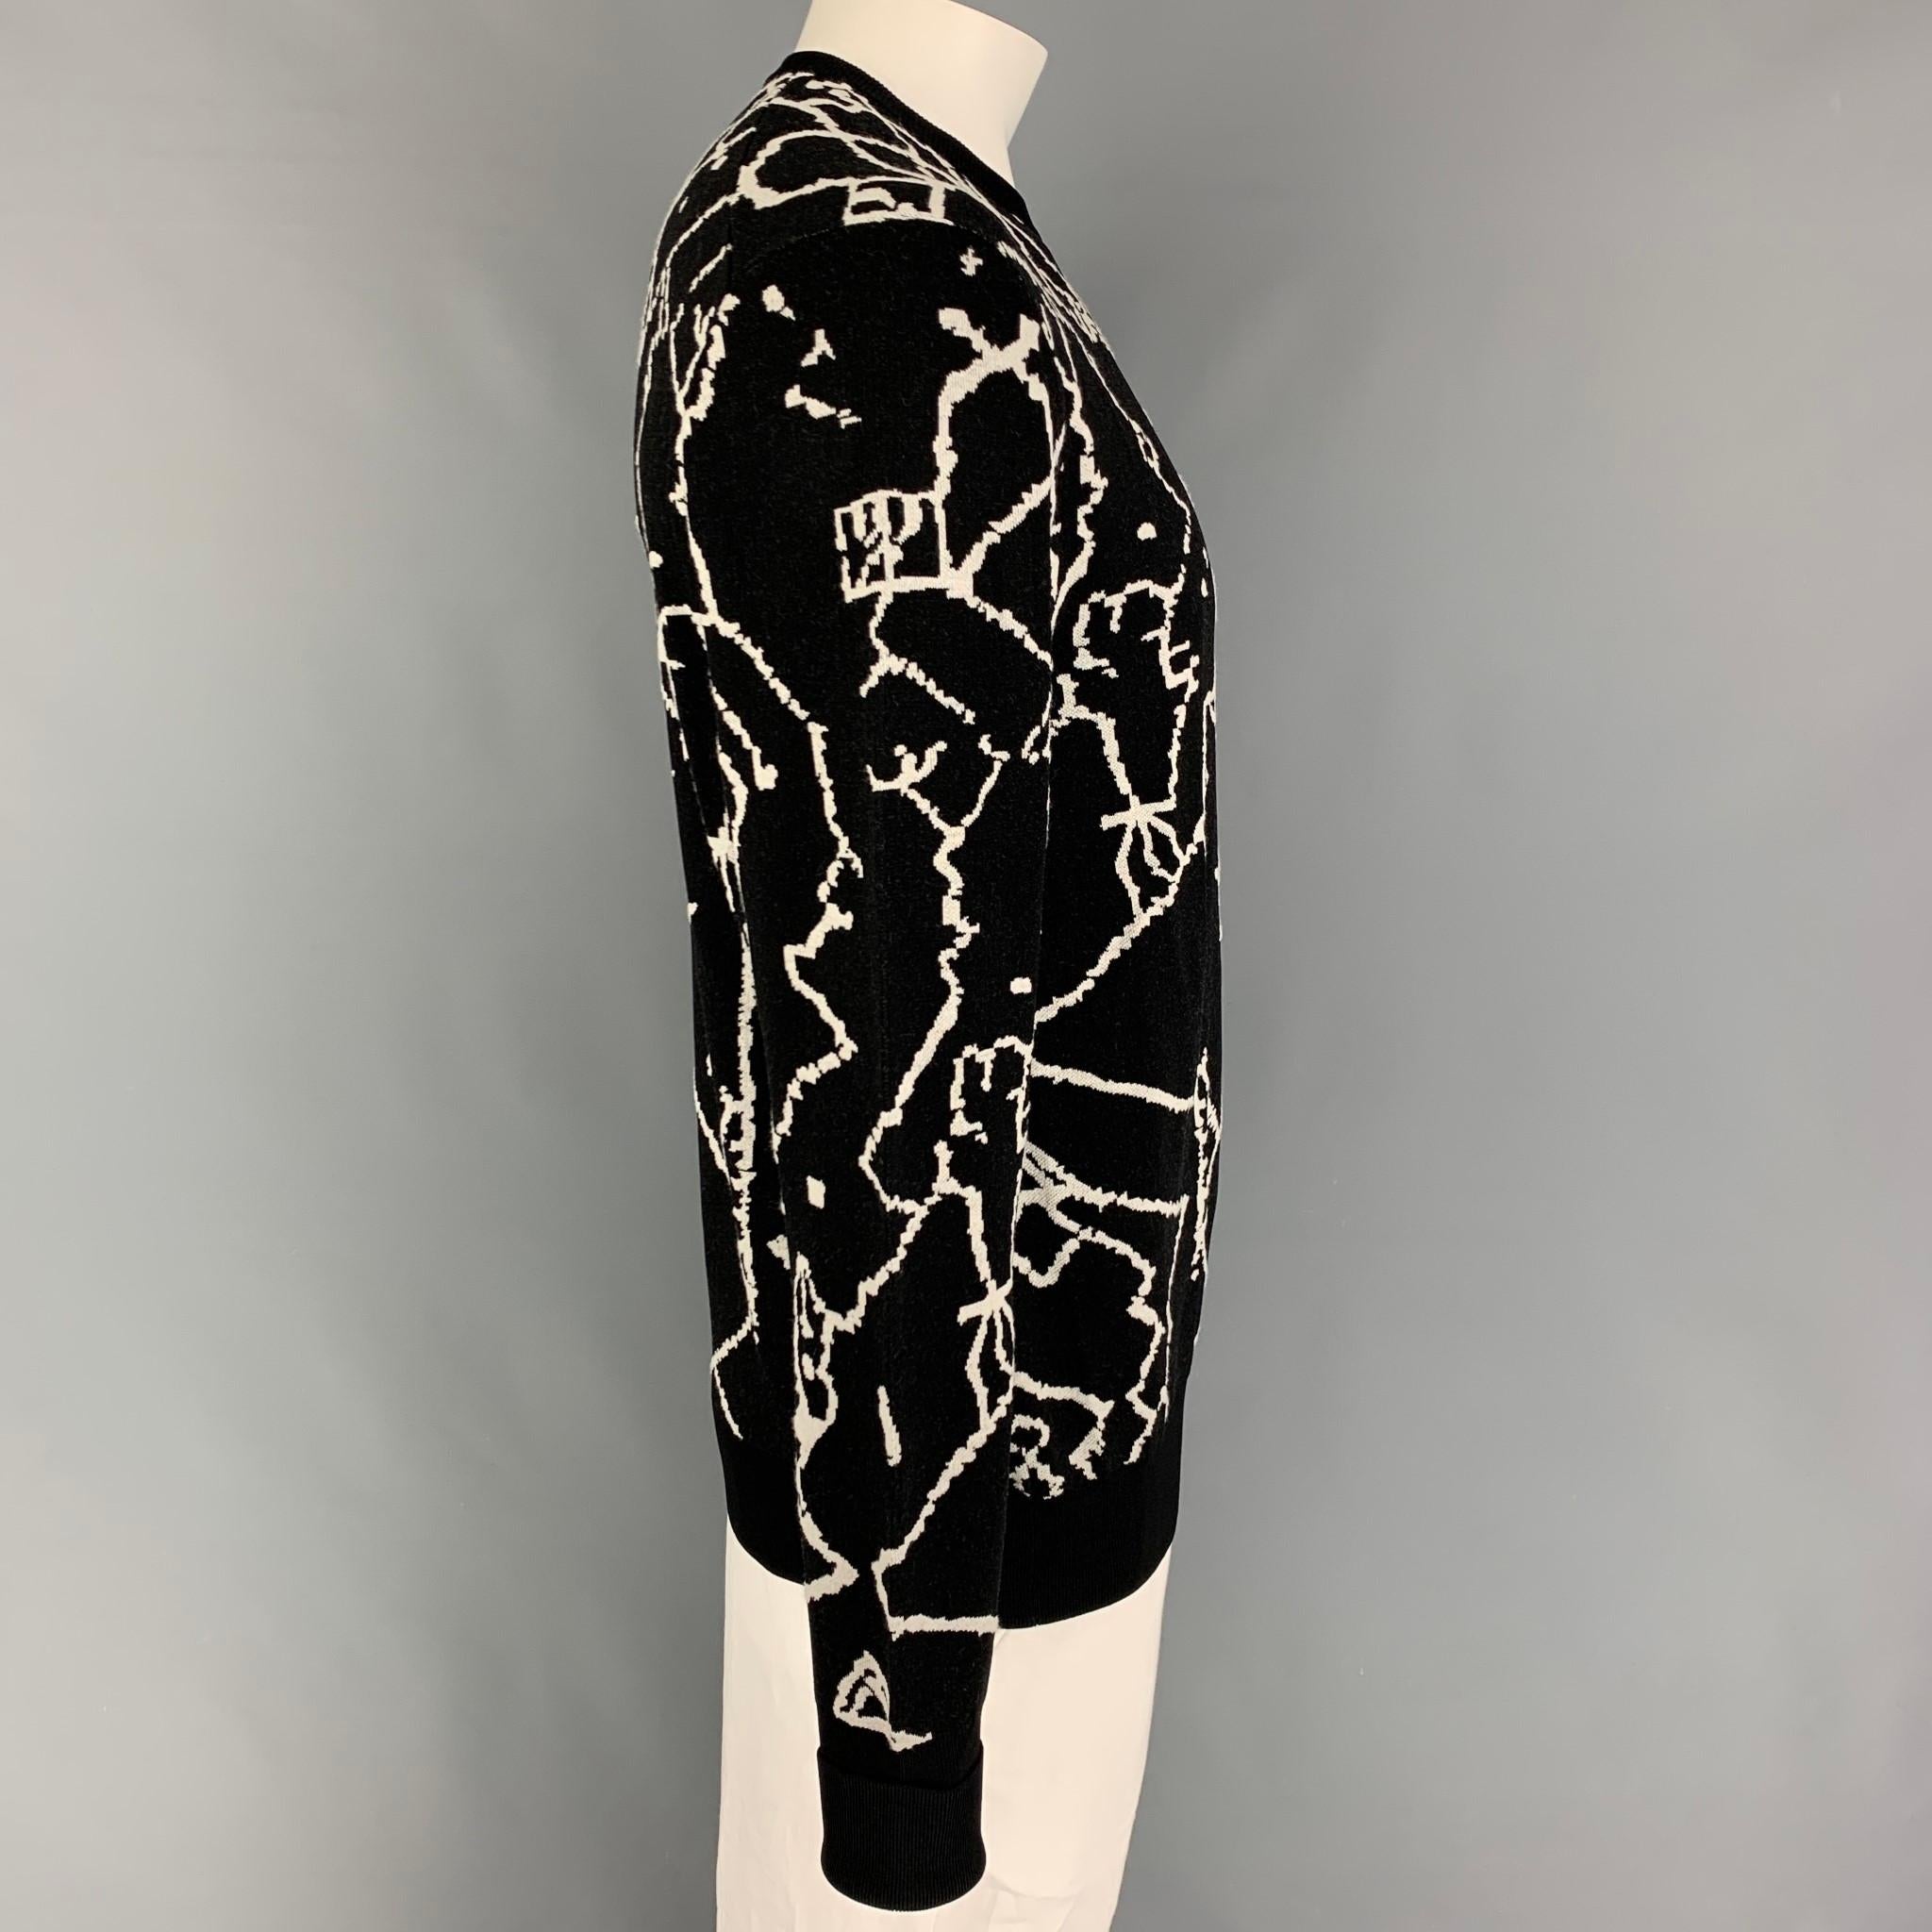 NEIL BARRETT sweater comes in a black & white abstract print wool  / viscose featuring a slim wide fit and crew-neck. 

Very Good Pre-Owned Condition.
Marked: L

Measurements:

Shoulder: 18 in.
Chest: 44 in.
Sleeve: 30.5 in.
Length: 28.5 in. 